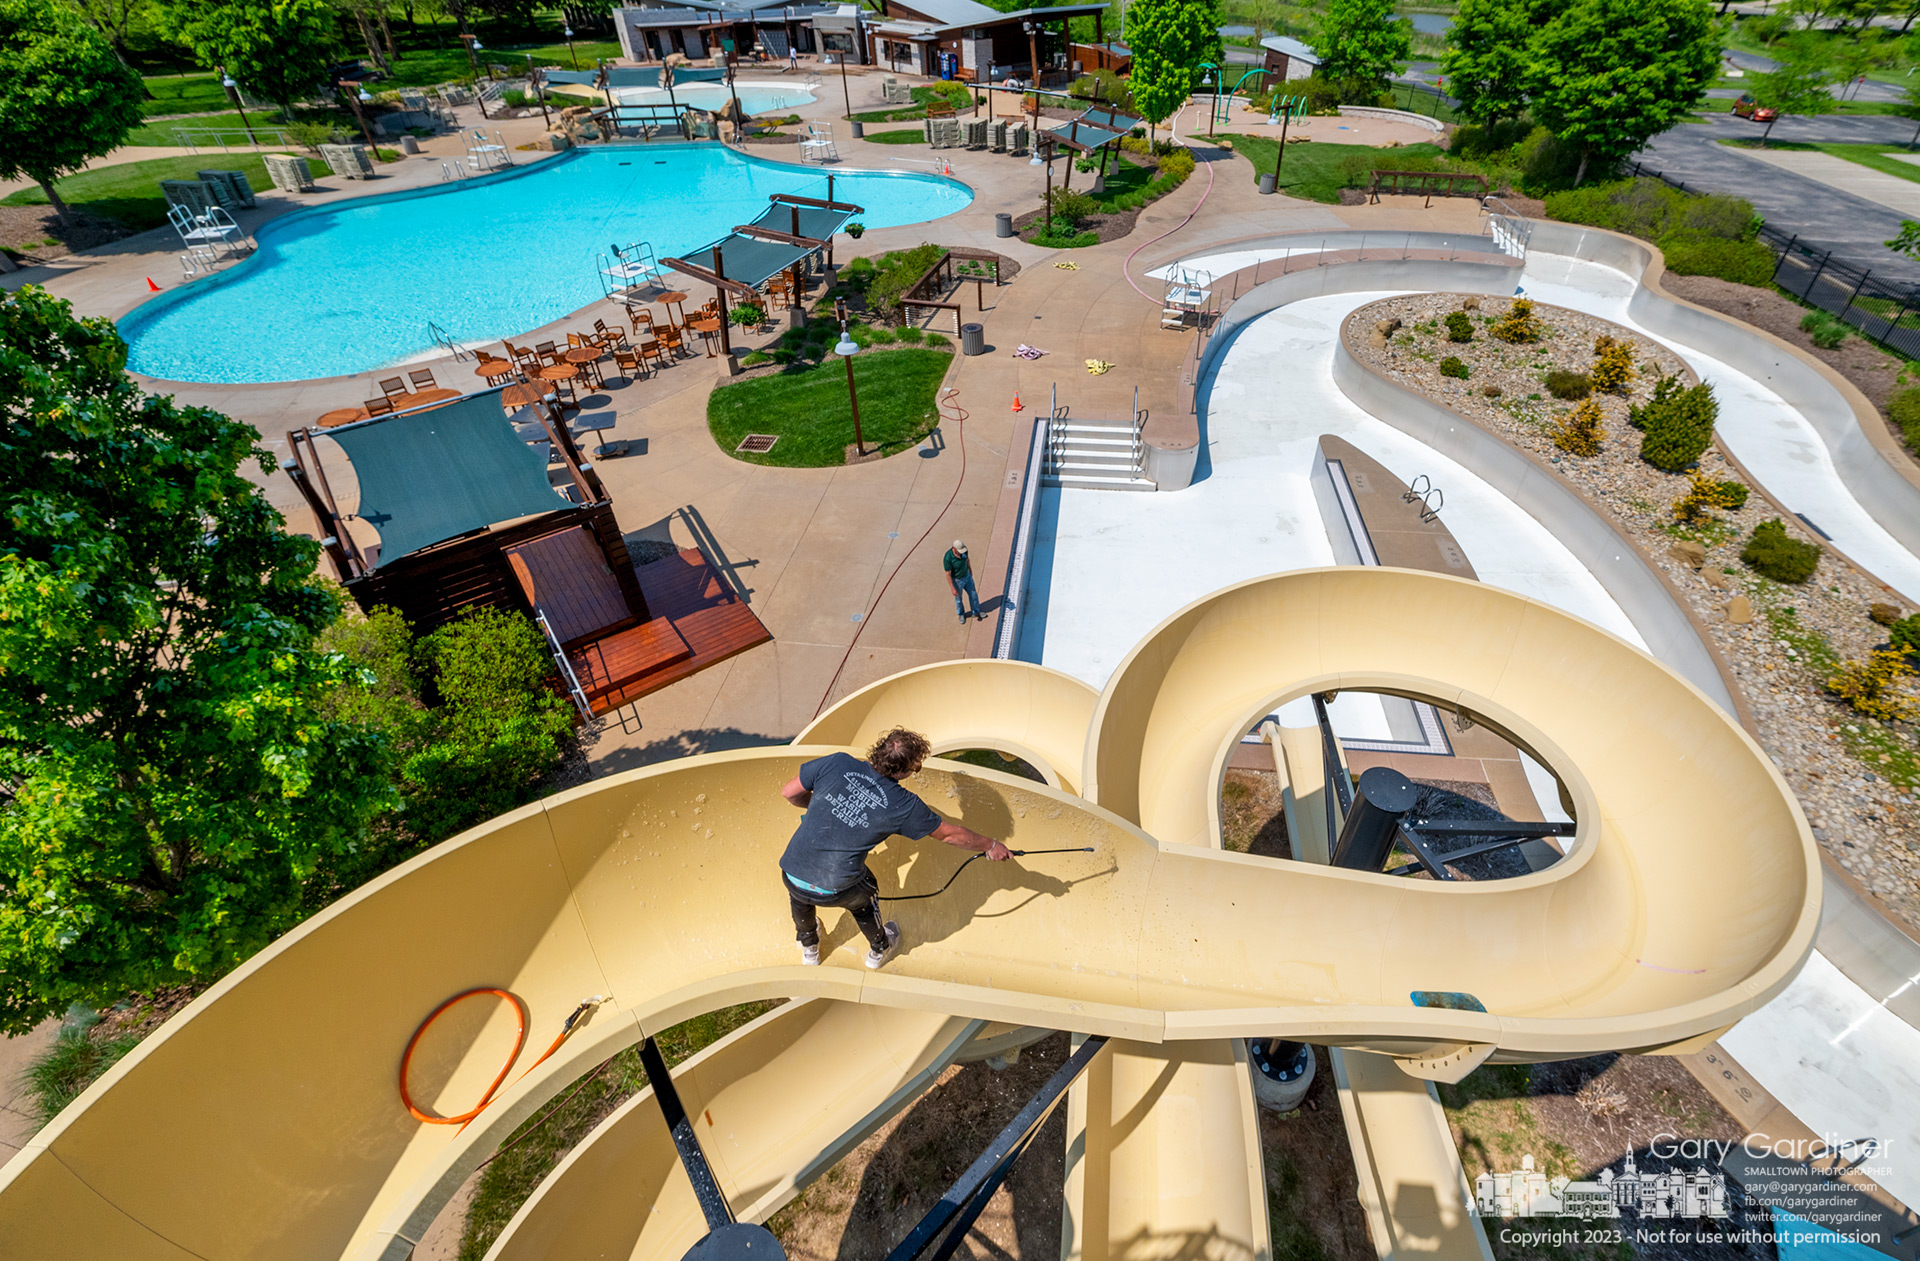 The slide at Highlands gets a washing, scrubbing, waxing, and buffing before the pool opens next weekend for the 2023 season. My Final Photo for May 17, 2023.